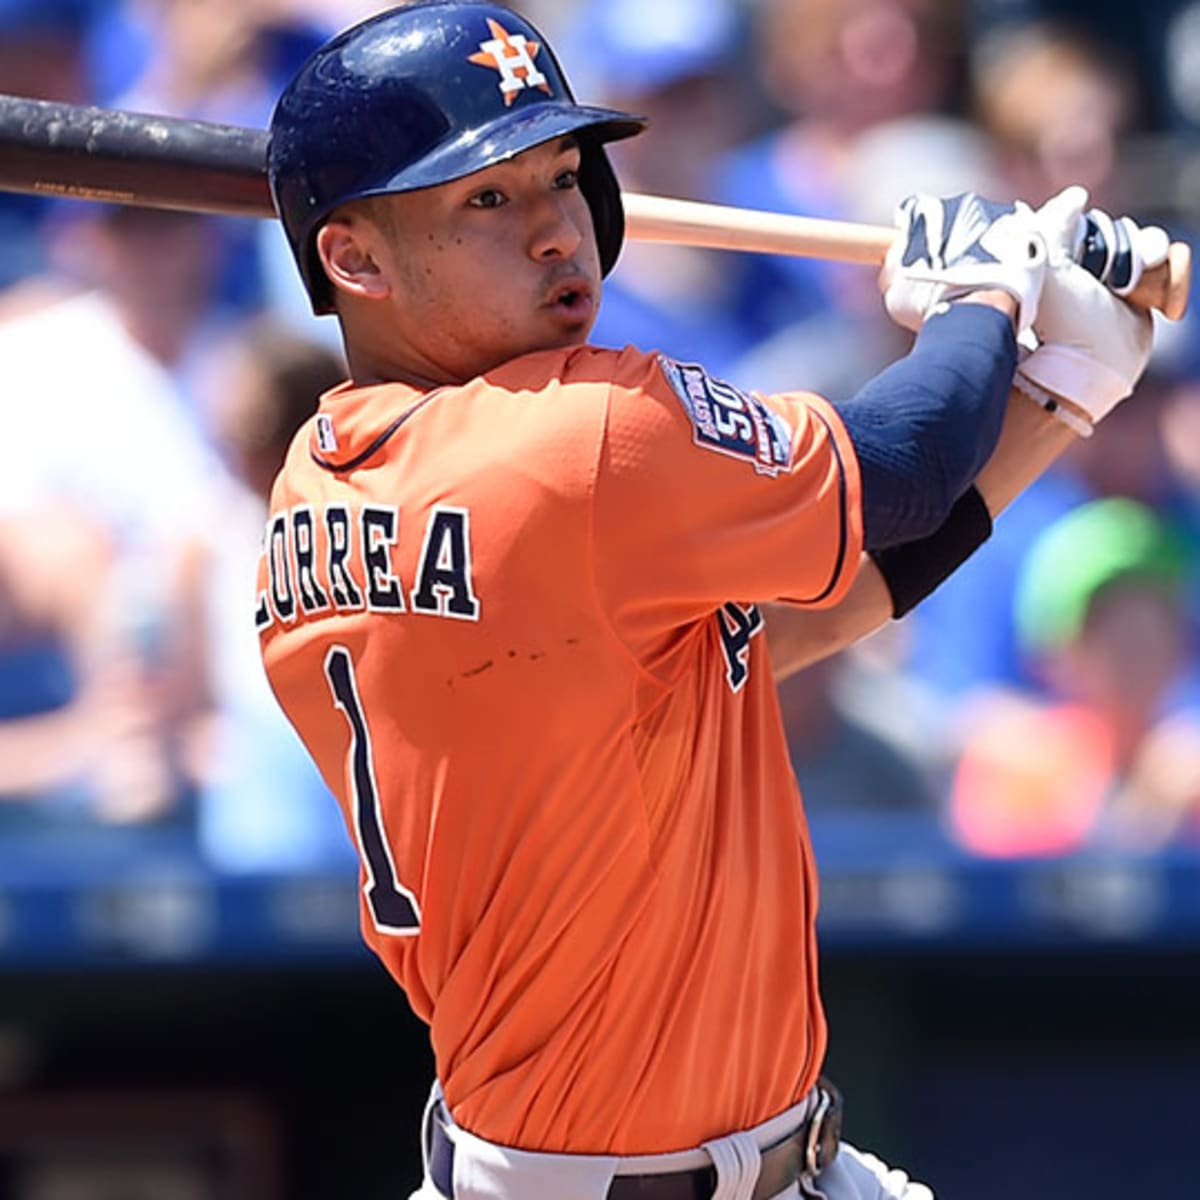 Astros shortstop Carlos Correa already a star at just 21 years old